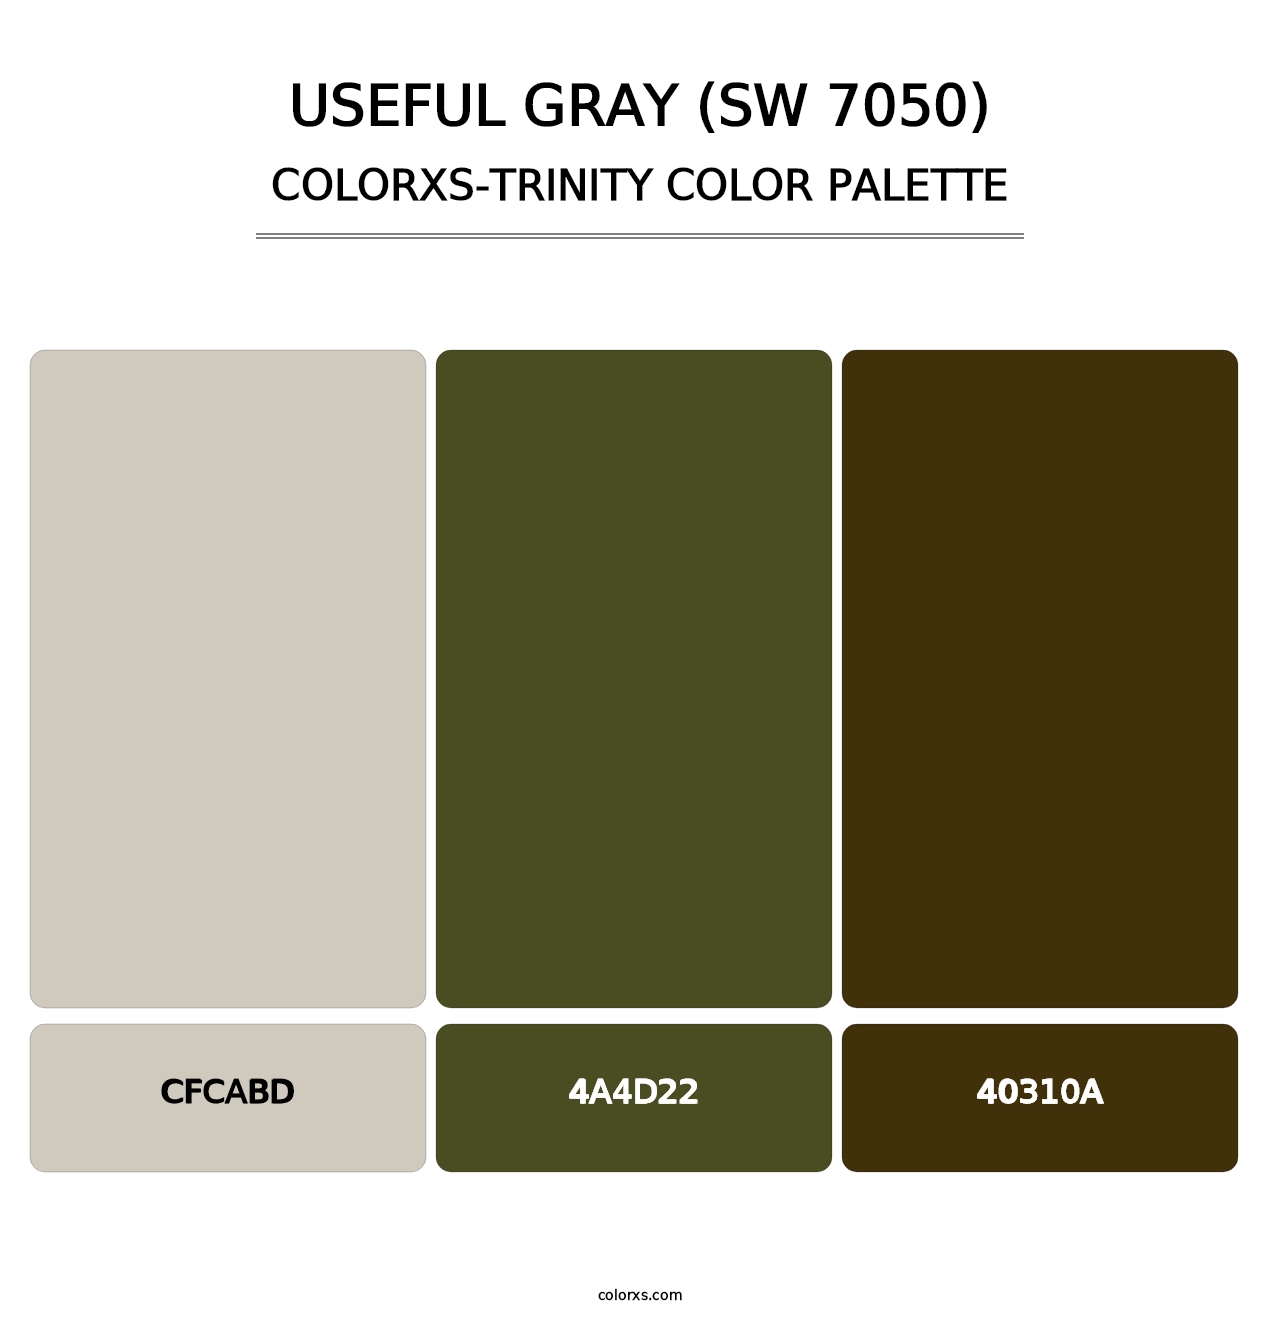 Useful Gray (SW 7050) - Colorxs Trinity Palette